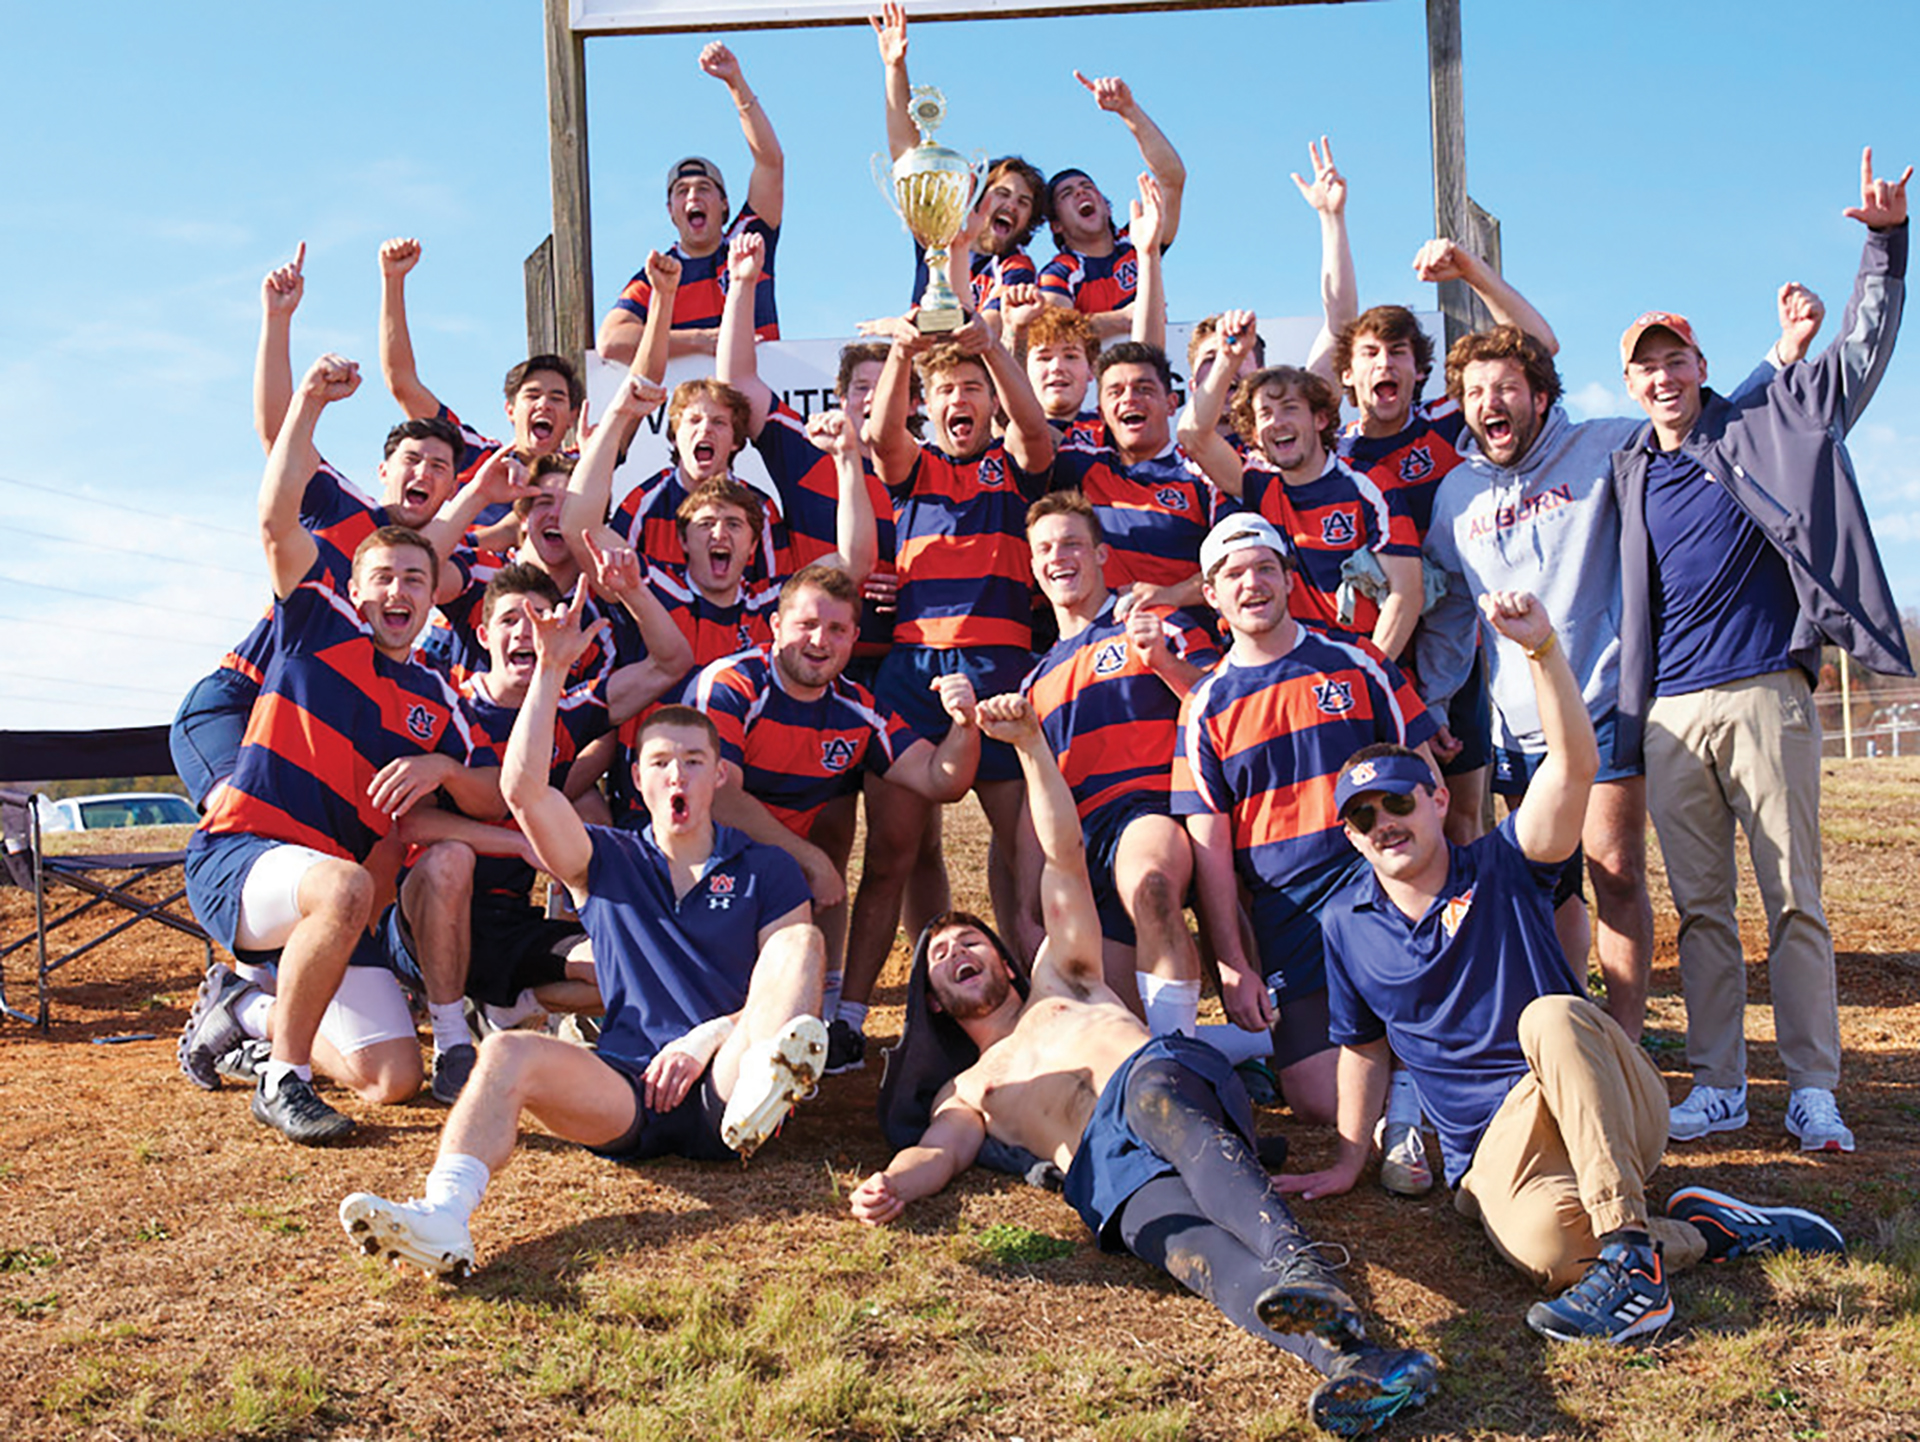 Rugby team cheering in their jerseys